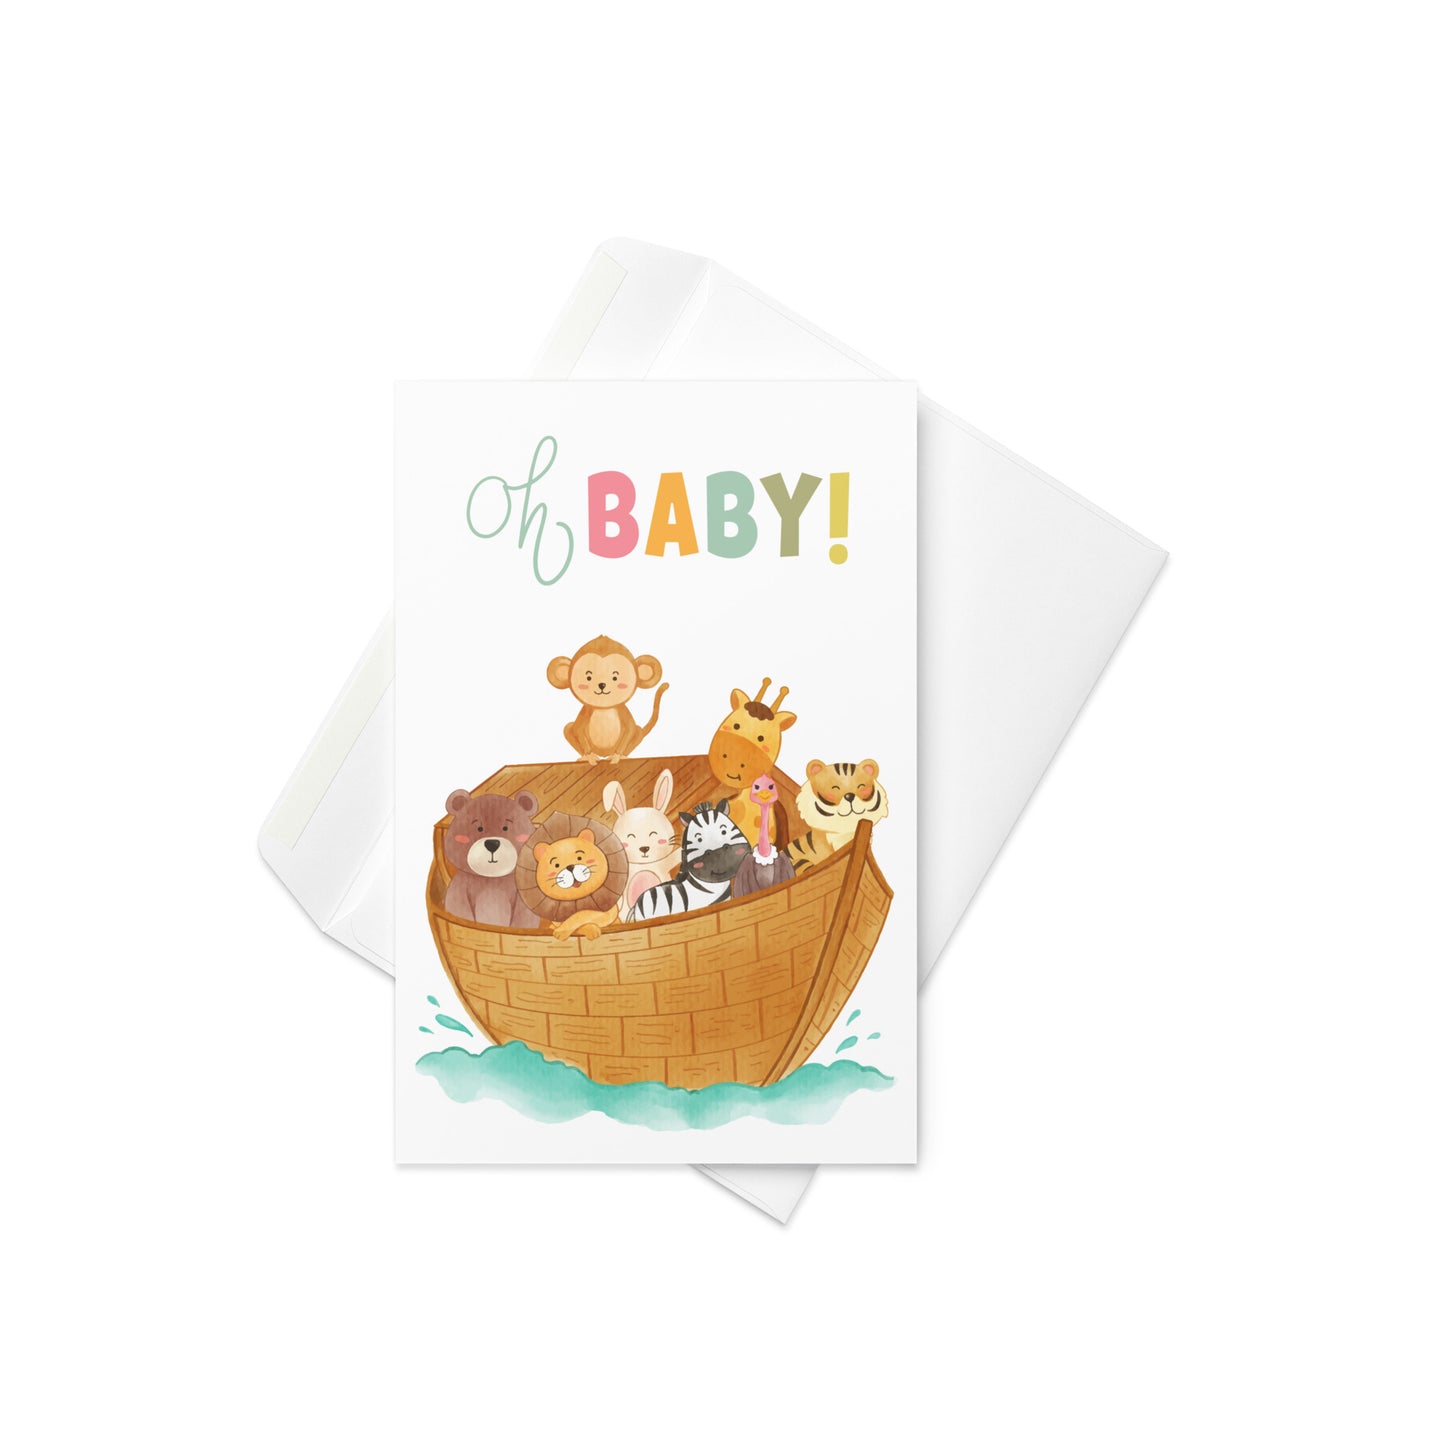 Oh Baby! Greeting card